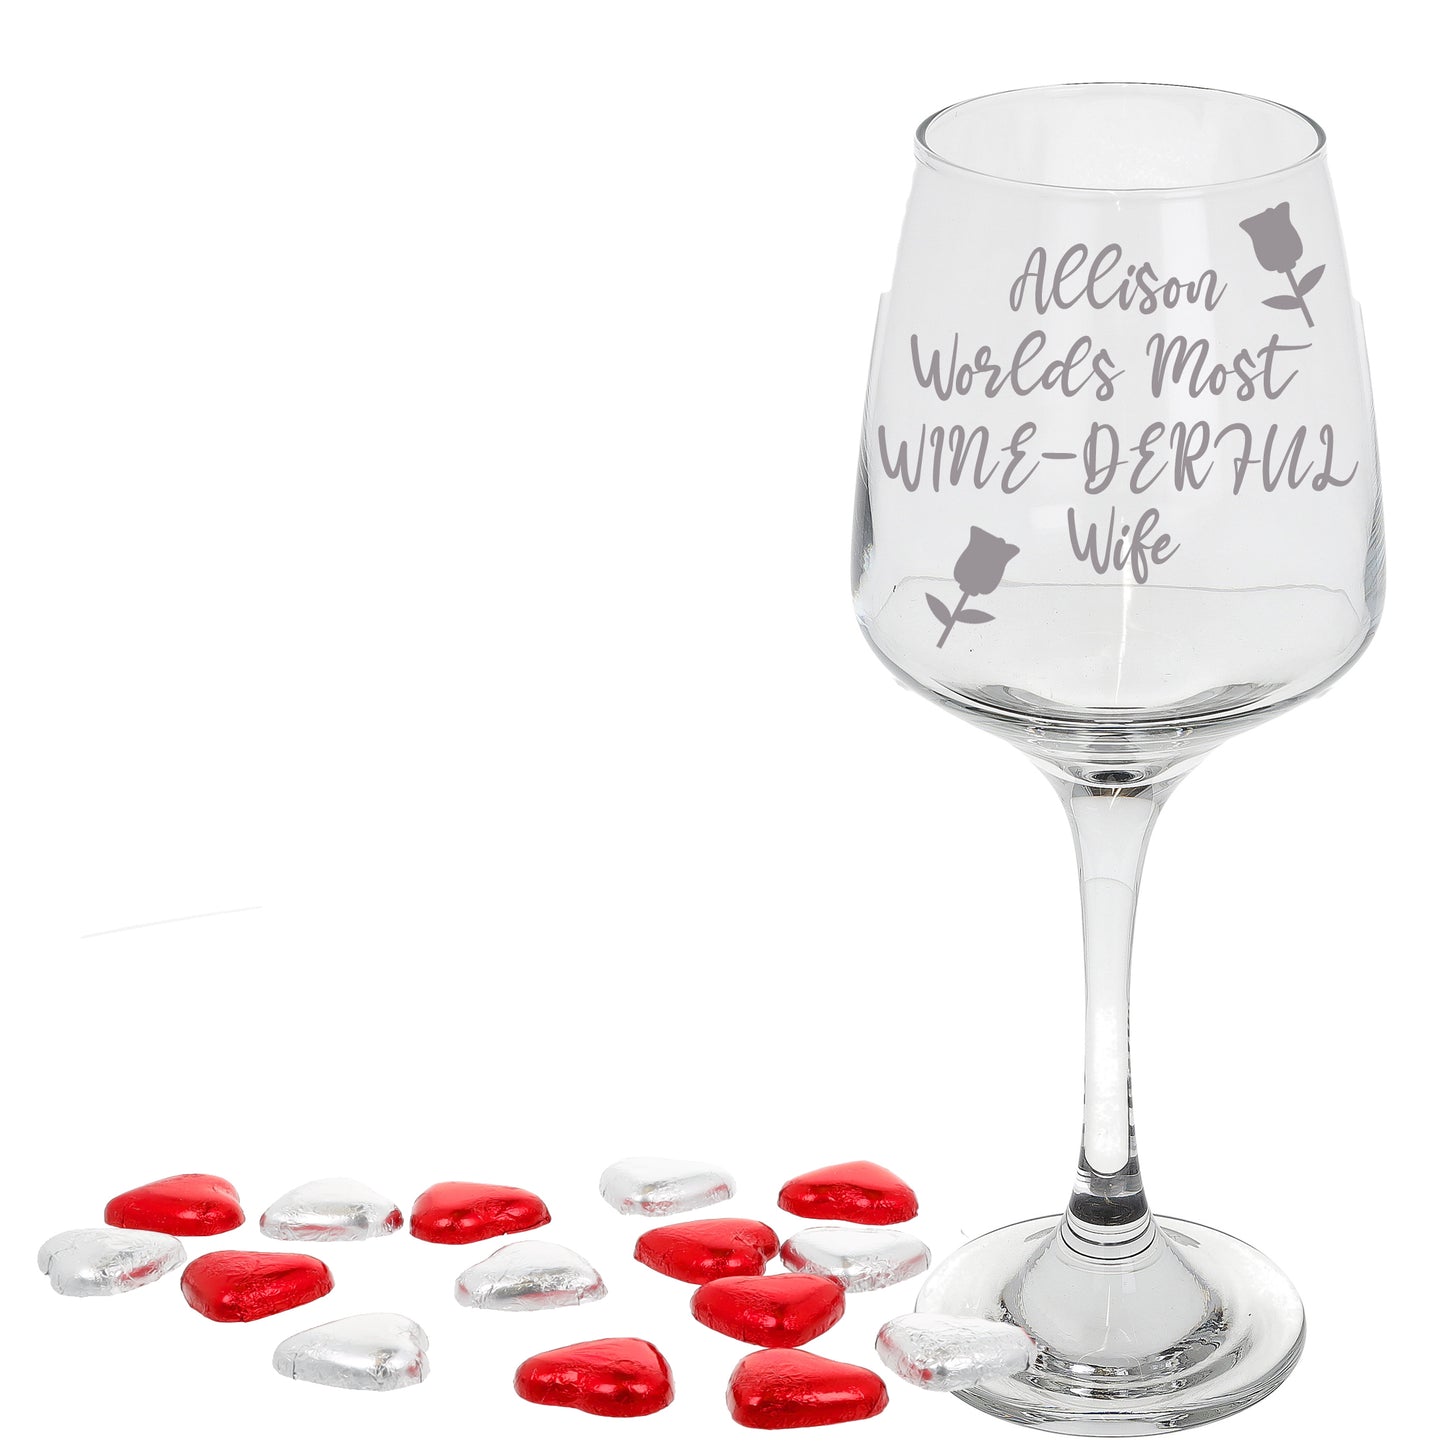 Engraved Personalised Wine-derful Wine Glass  - Always Looking Good - Large Glass Hearts  